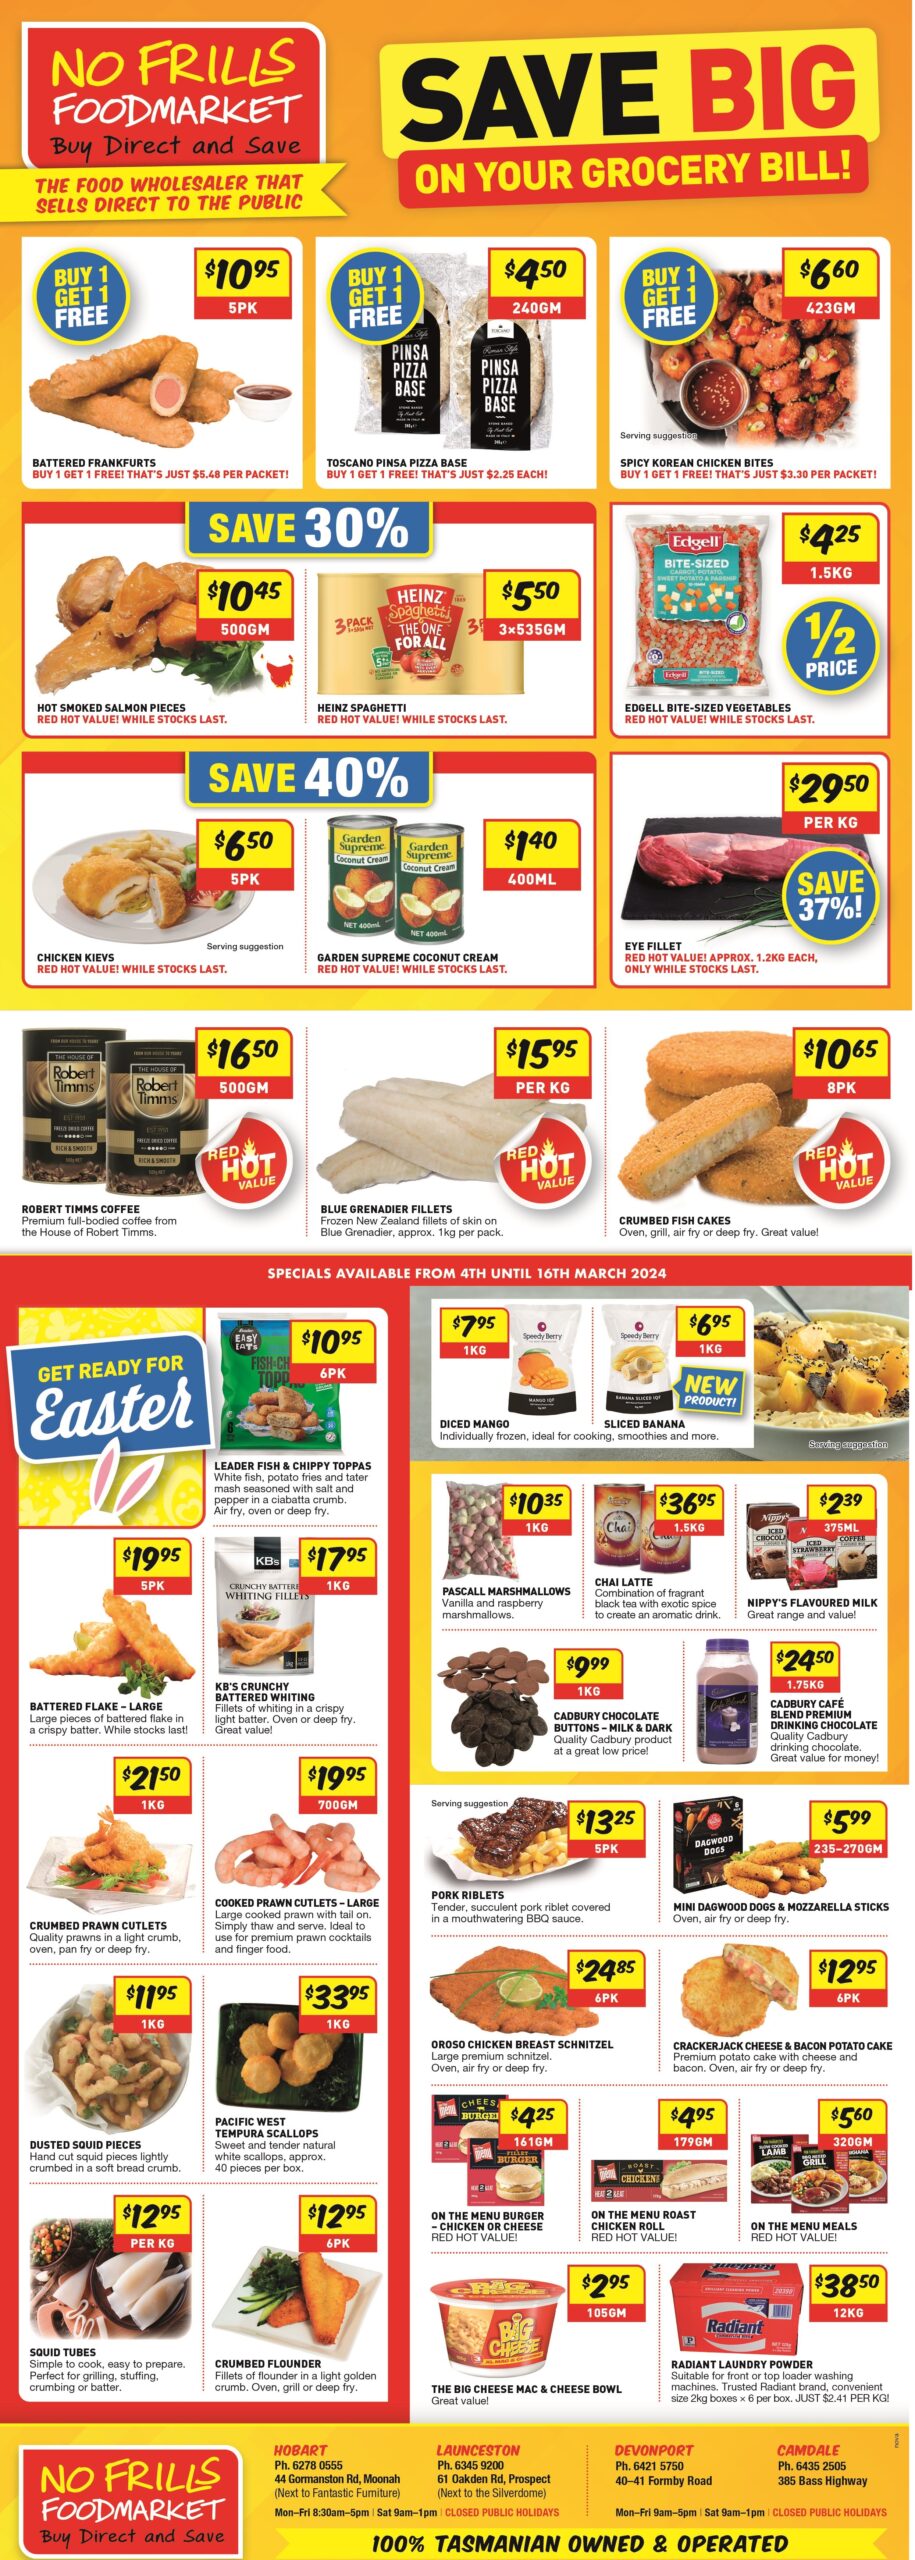 Weekly Specials, Buy Direct and Save